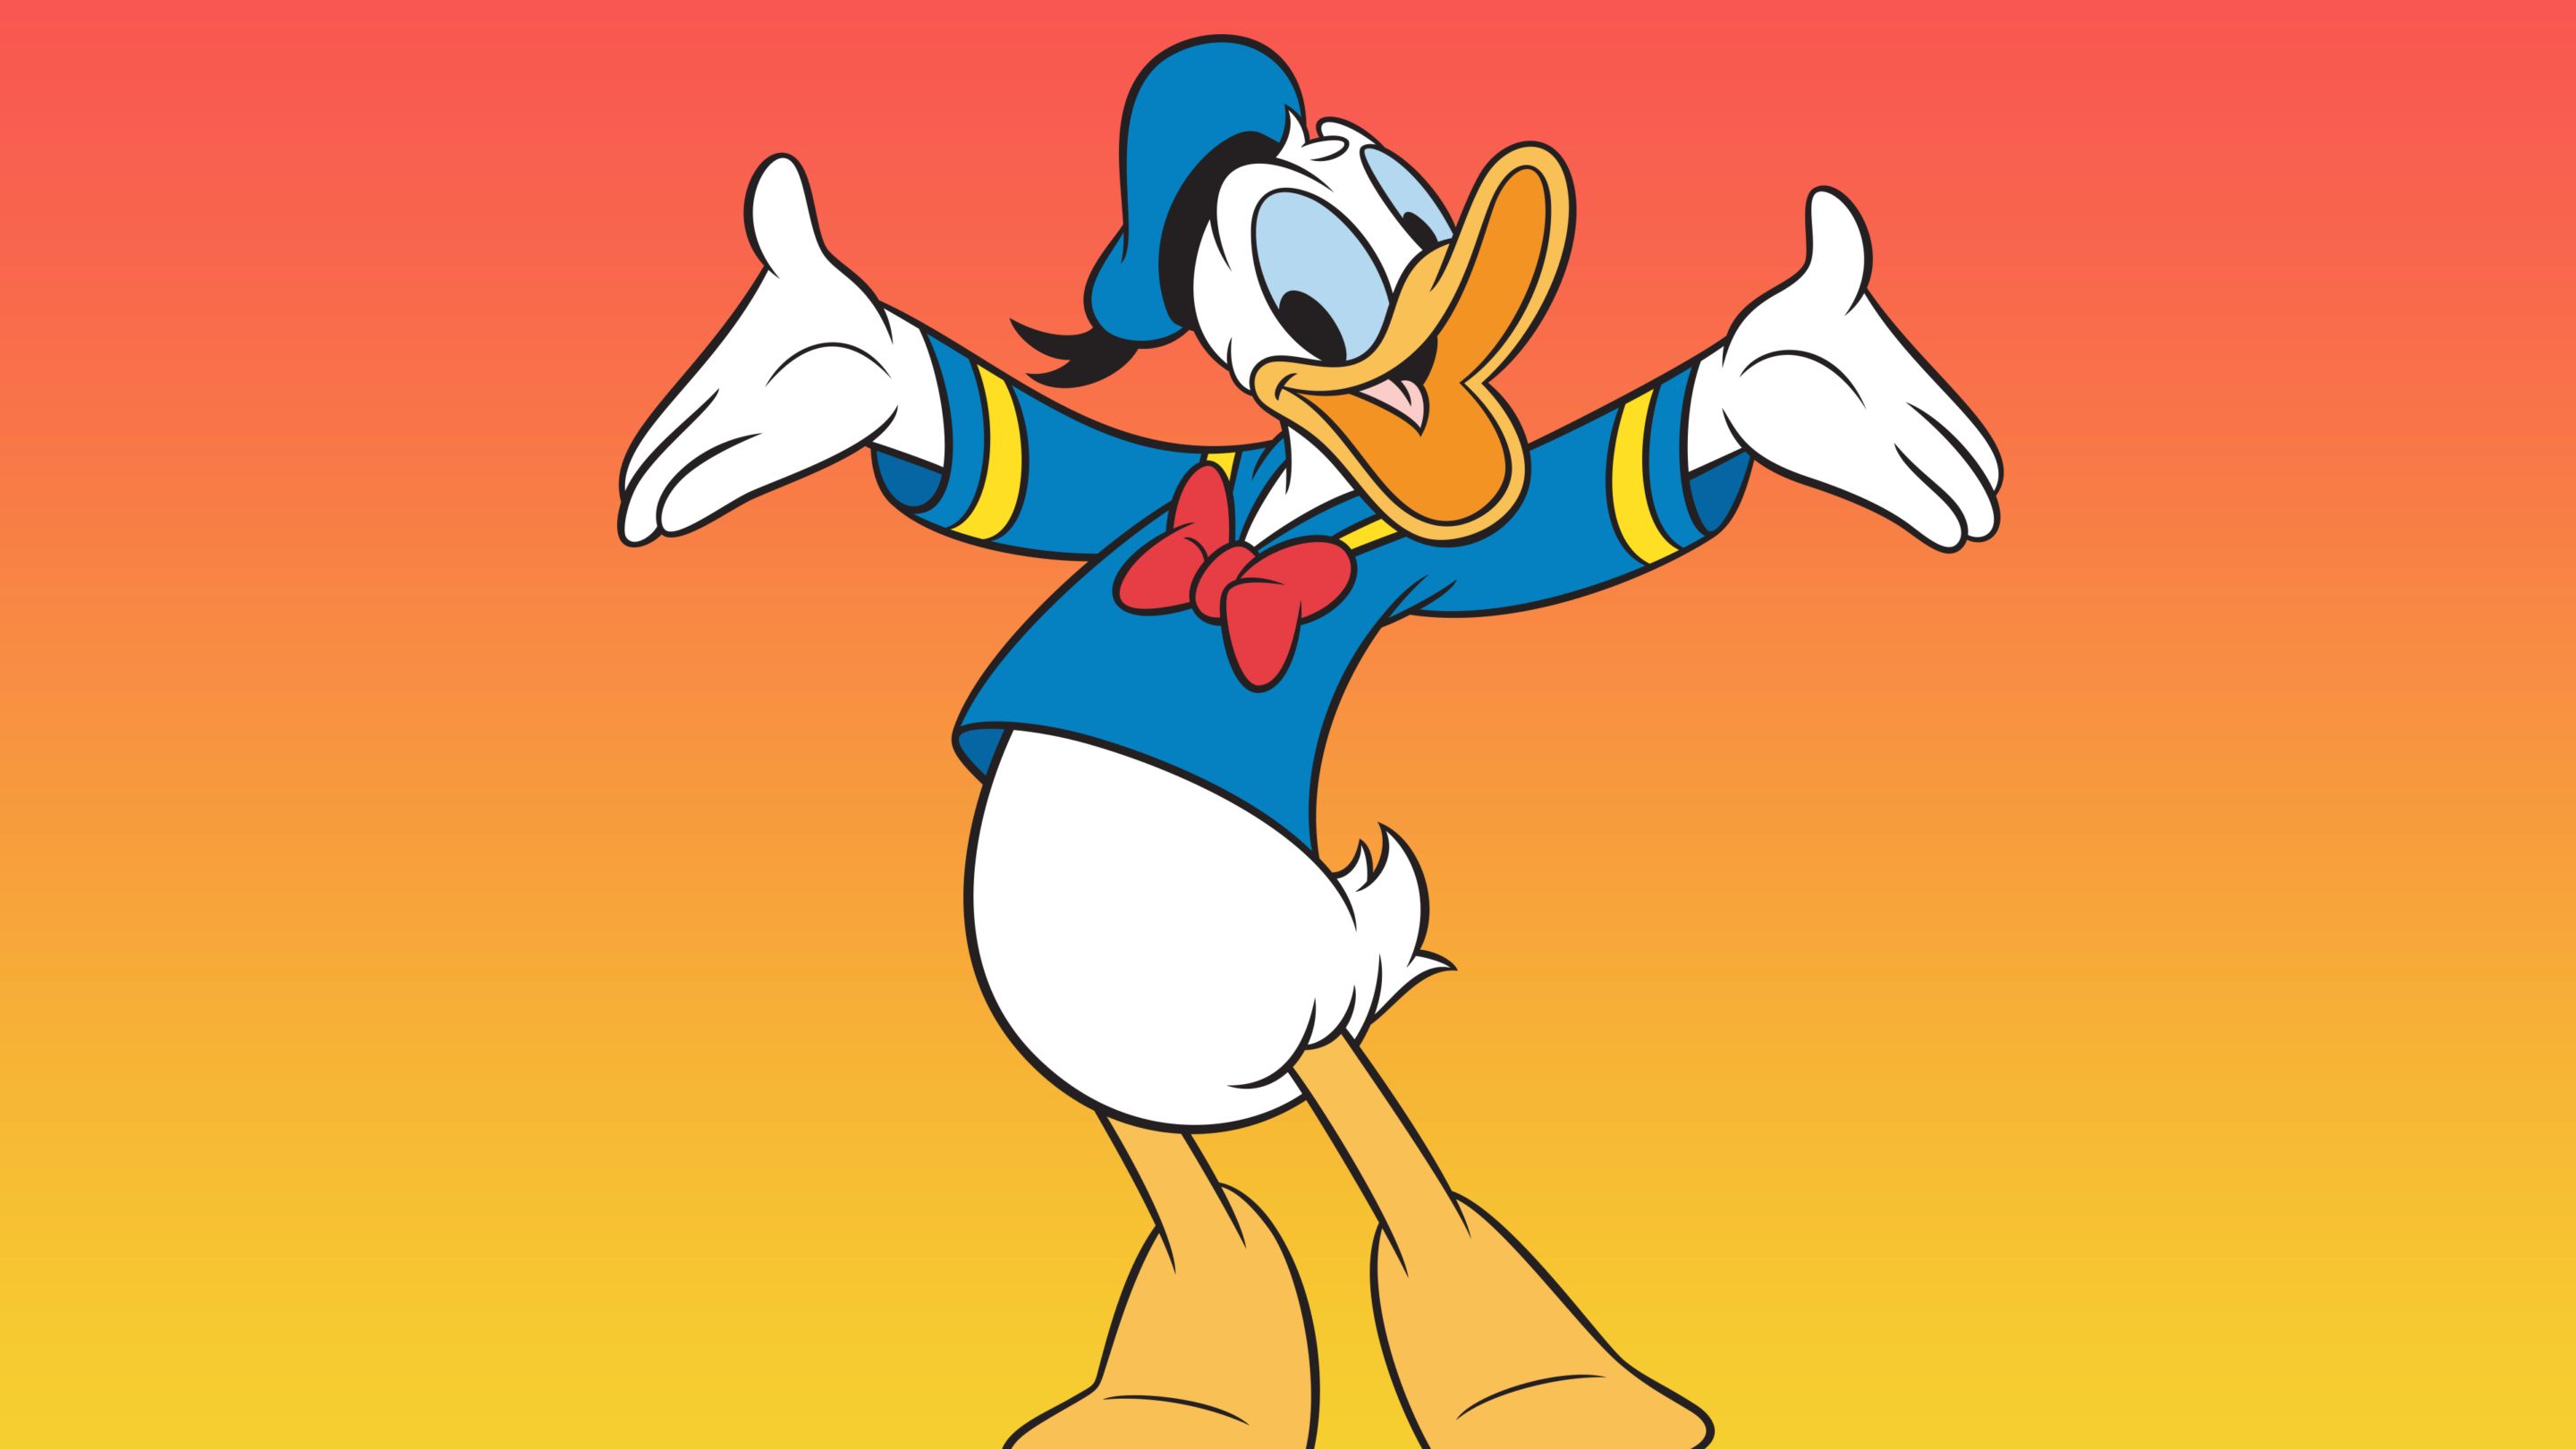 What is Donald Ducks full name?